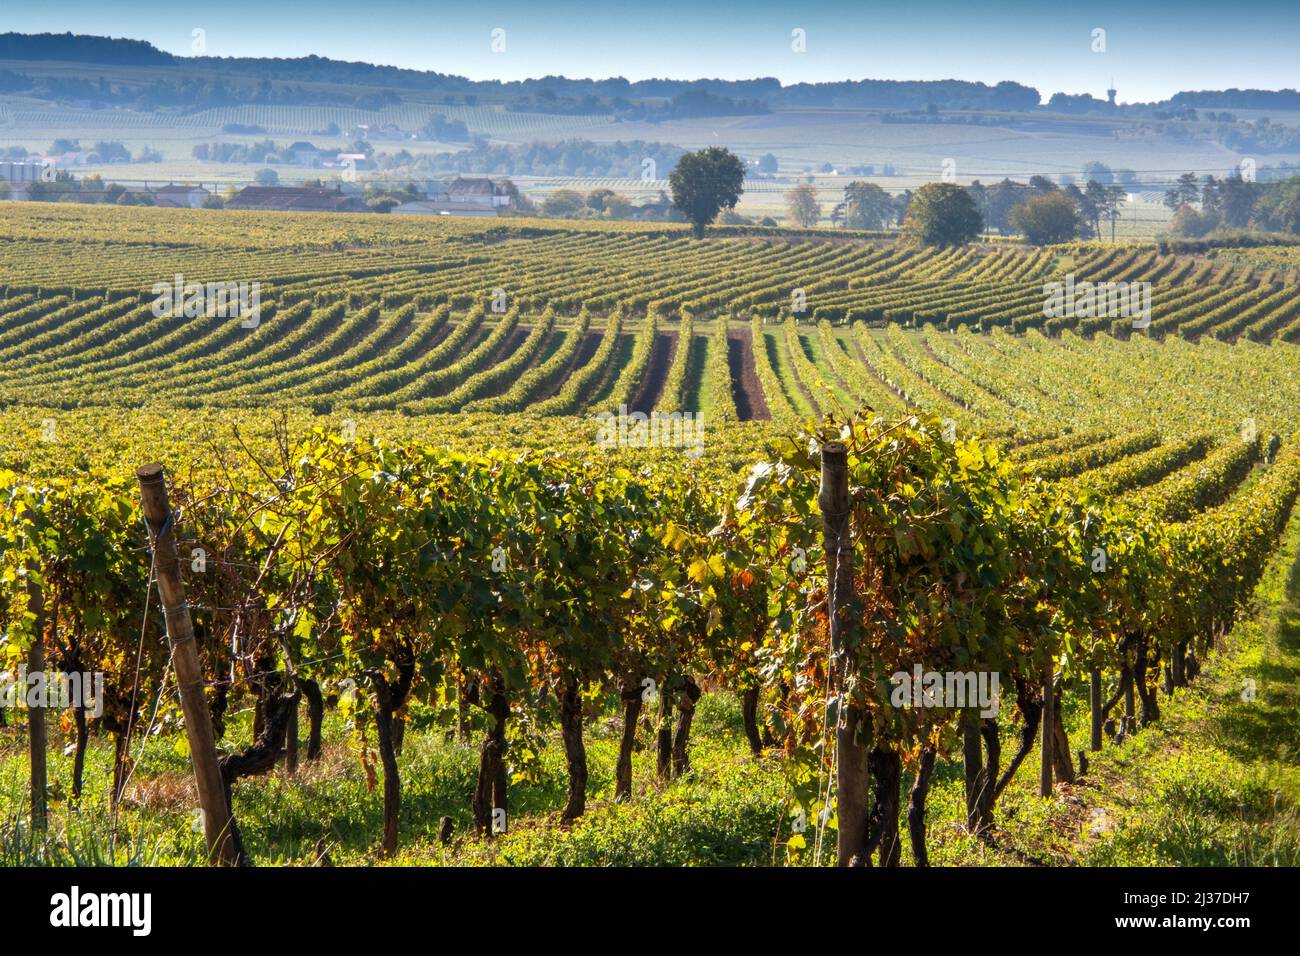 France=Nouvelle Aquitaine=Charente=wine fields landscape near Jaarnac, where the finest Cognacs are made. Stock Photo